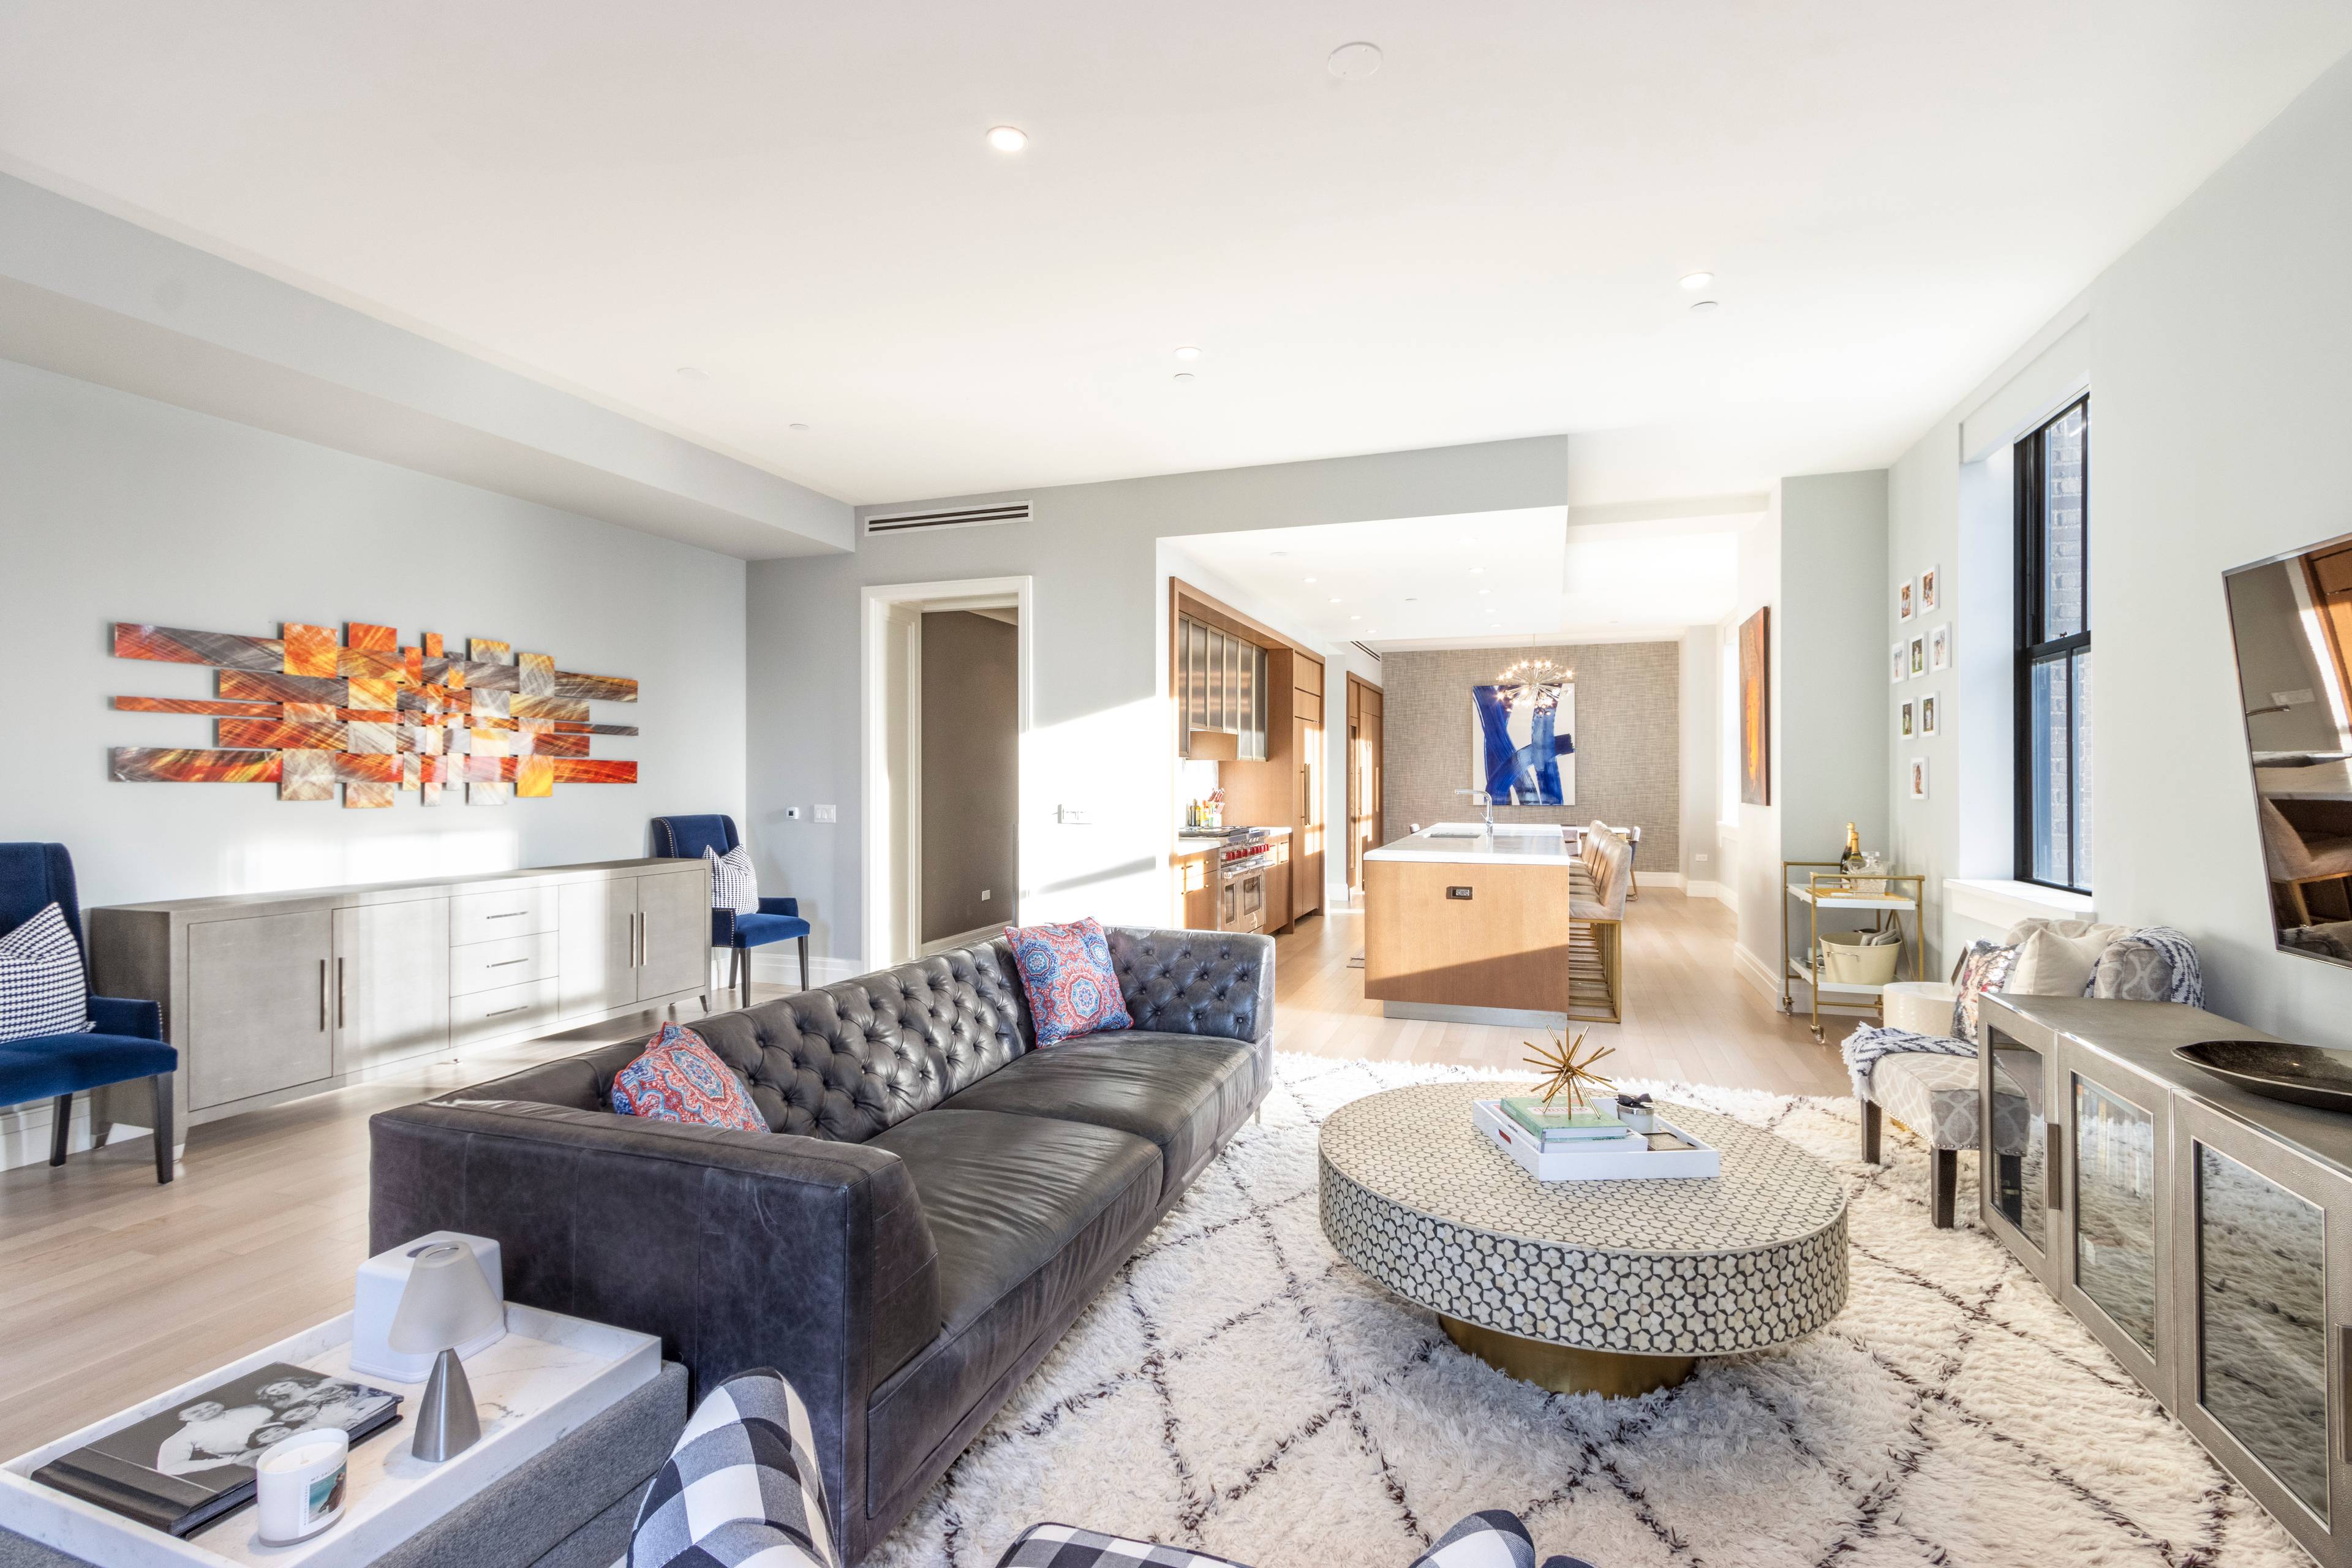 SPRAWLING FOUR FIVE BEDROOM HOME AT 100 BARCLAY STREET Welcome home.